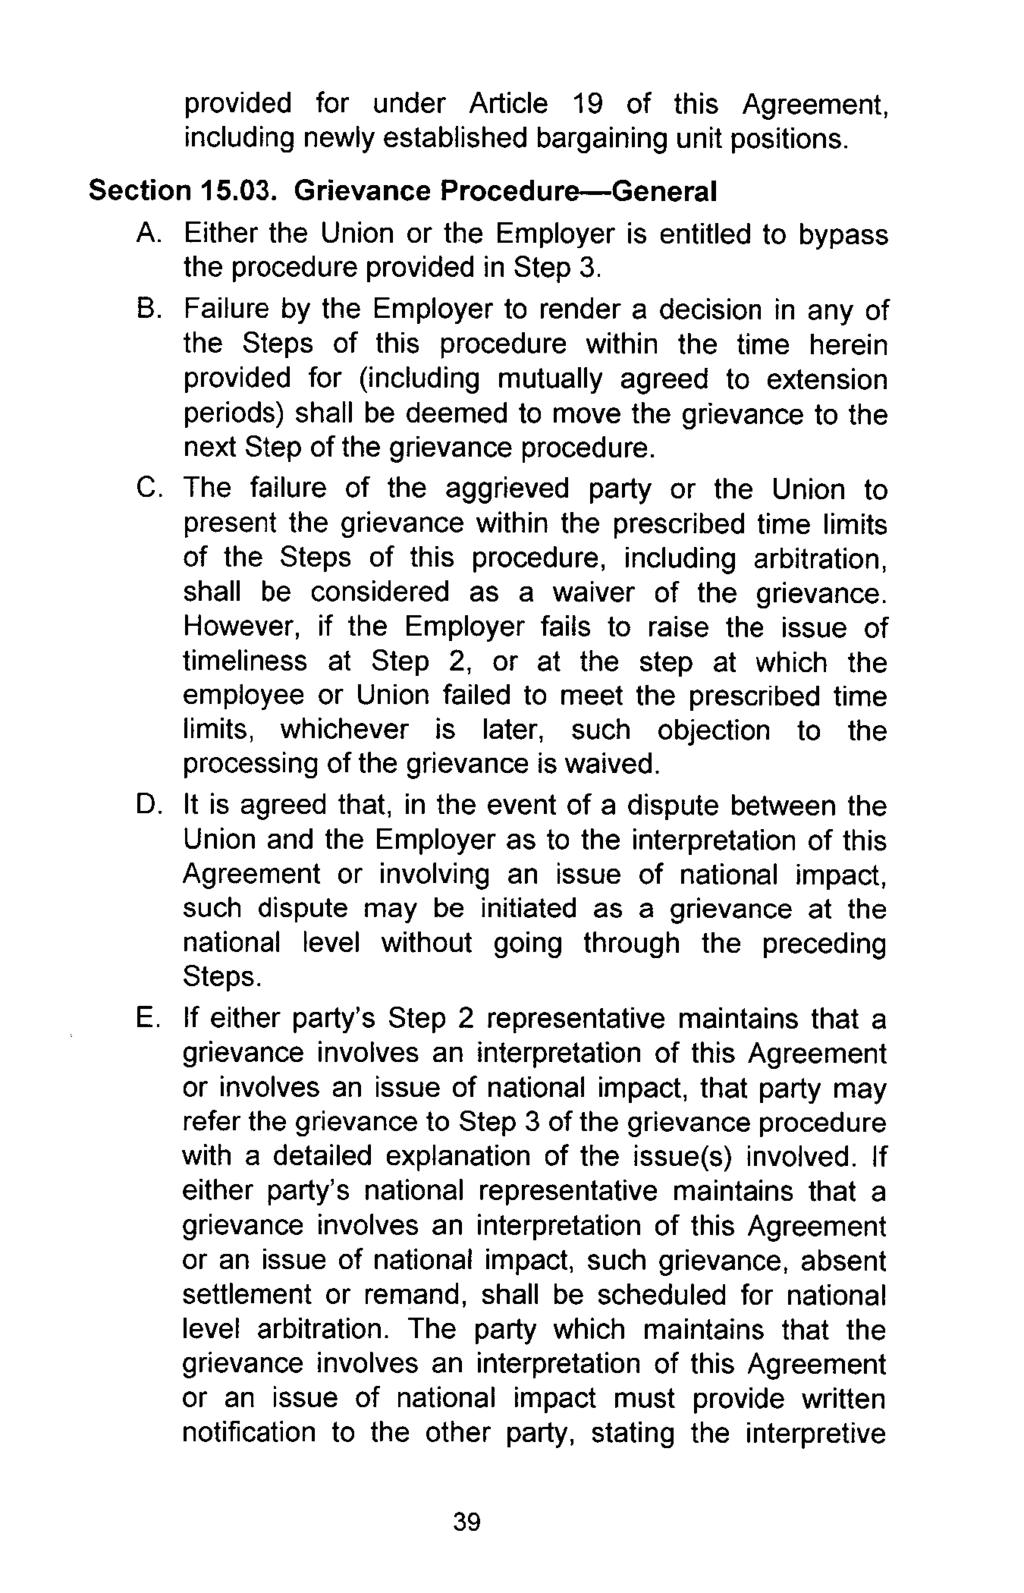 provided for under Article 19 of this Agreement, including newly established bargaining unit positions. Section 15.03. Grievance Procedure-General A.